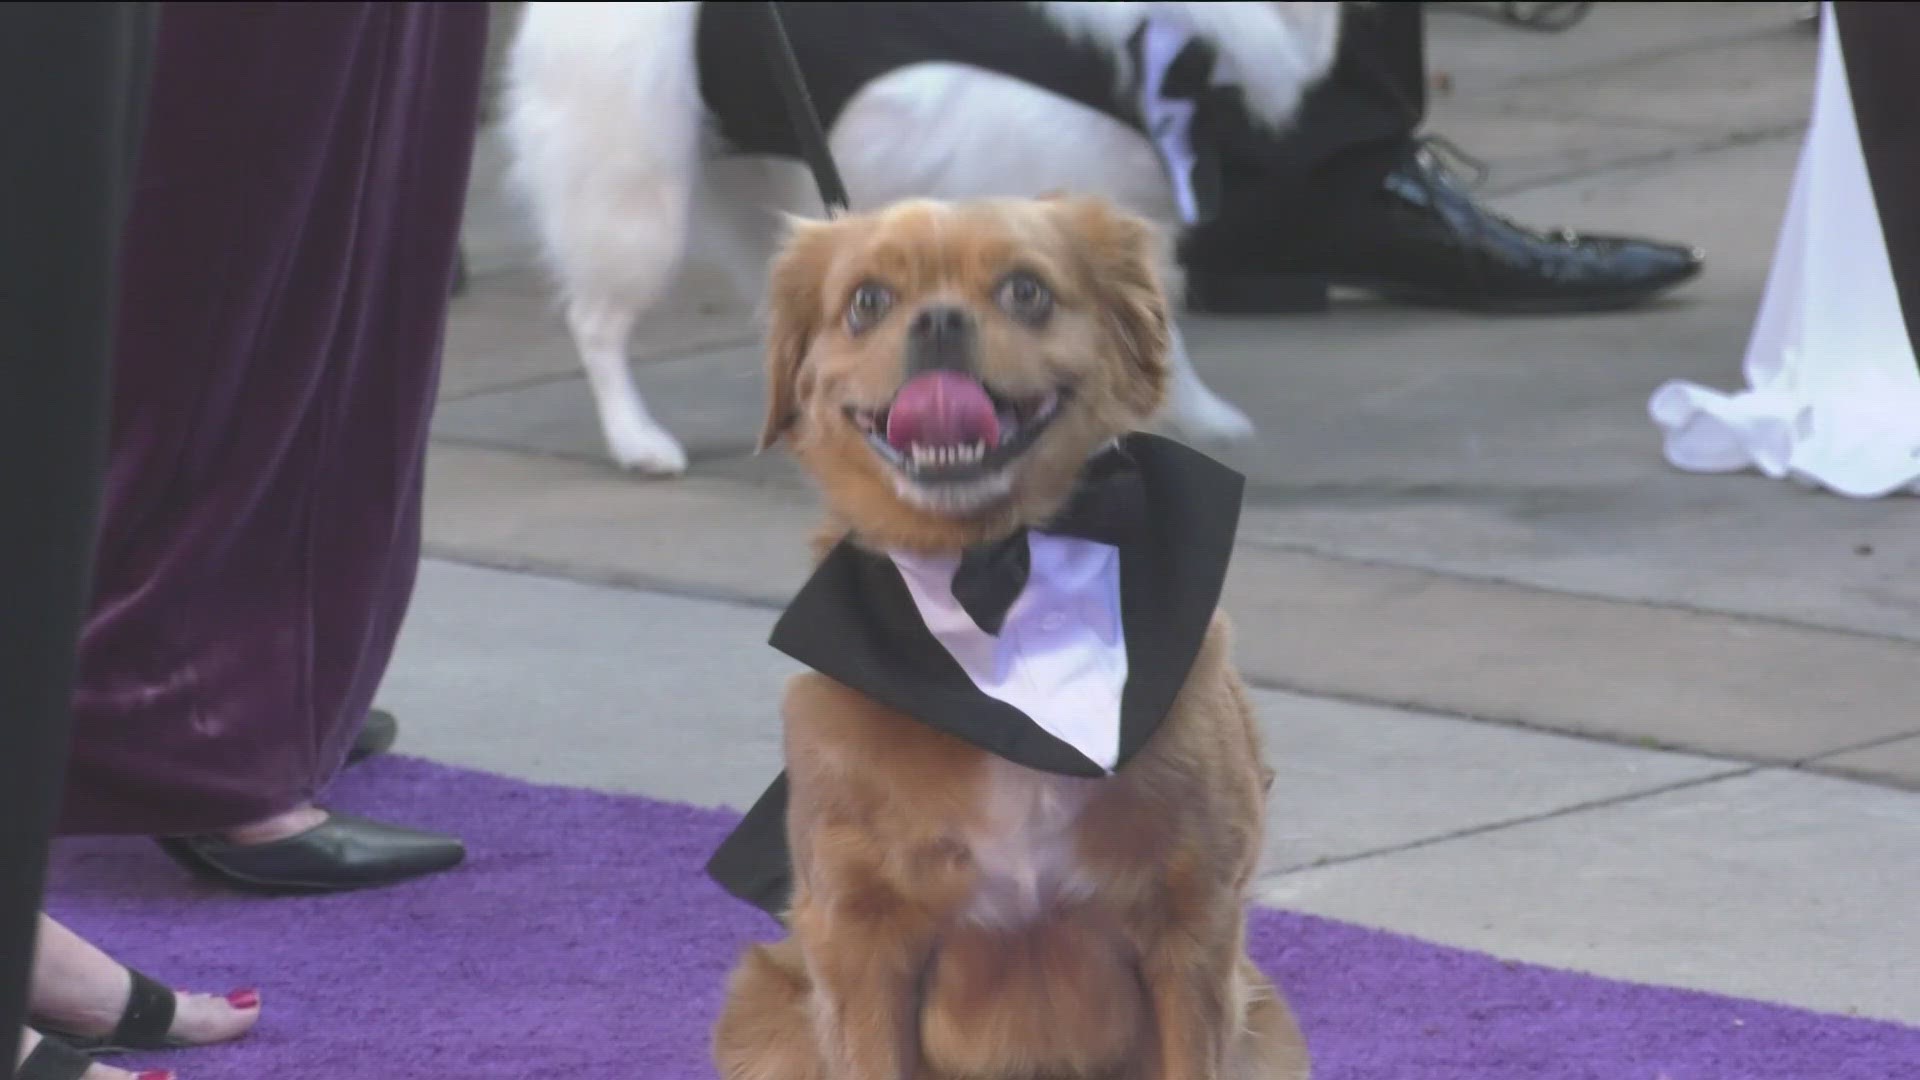 The dog-friendly event celebrates the joys in giving animals a loving home and raises funds for the Humane Society's work.